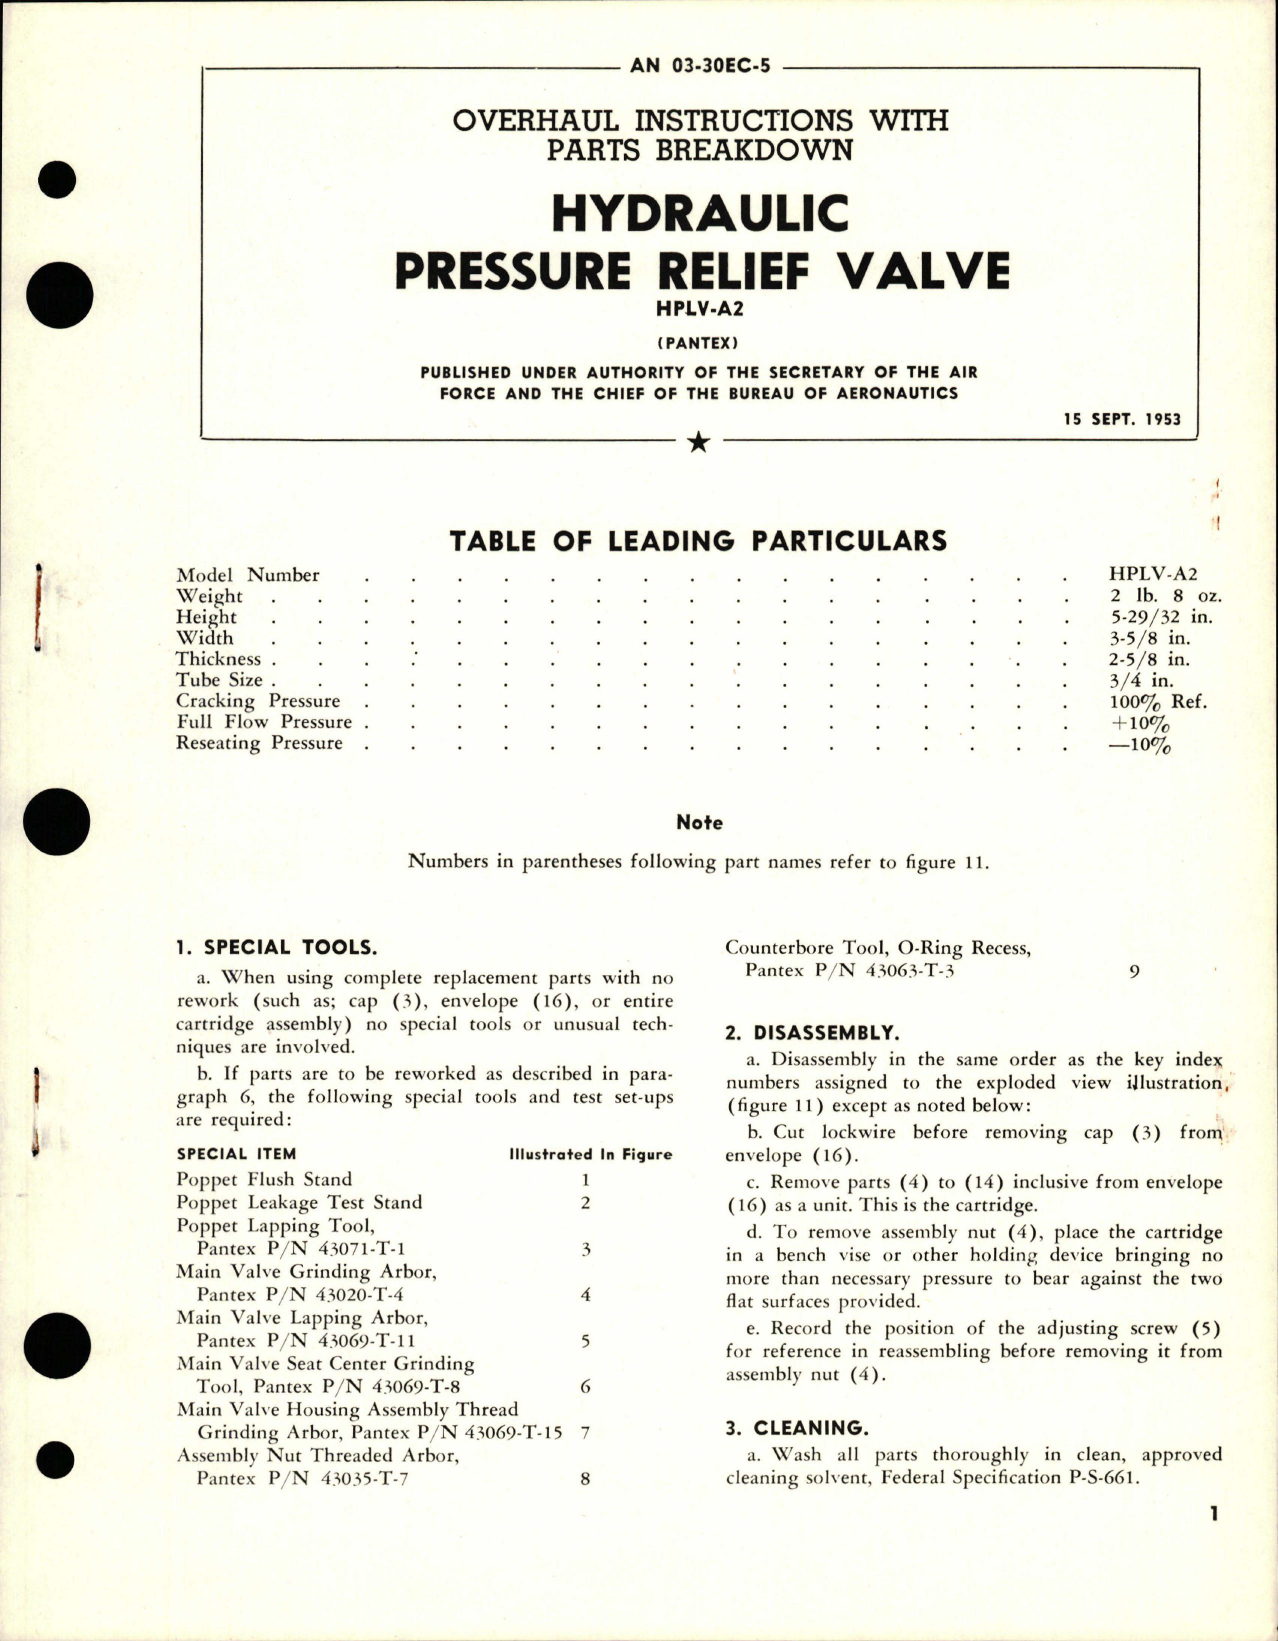 Sample page 1 from AirCorps Library document: Overhaul Instructions with Parts Breakdown for Hydraulic Pressure Relief Valve - HPLV-A2